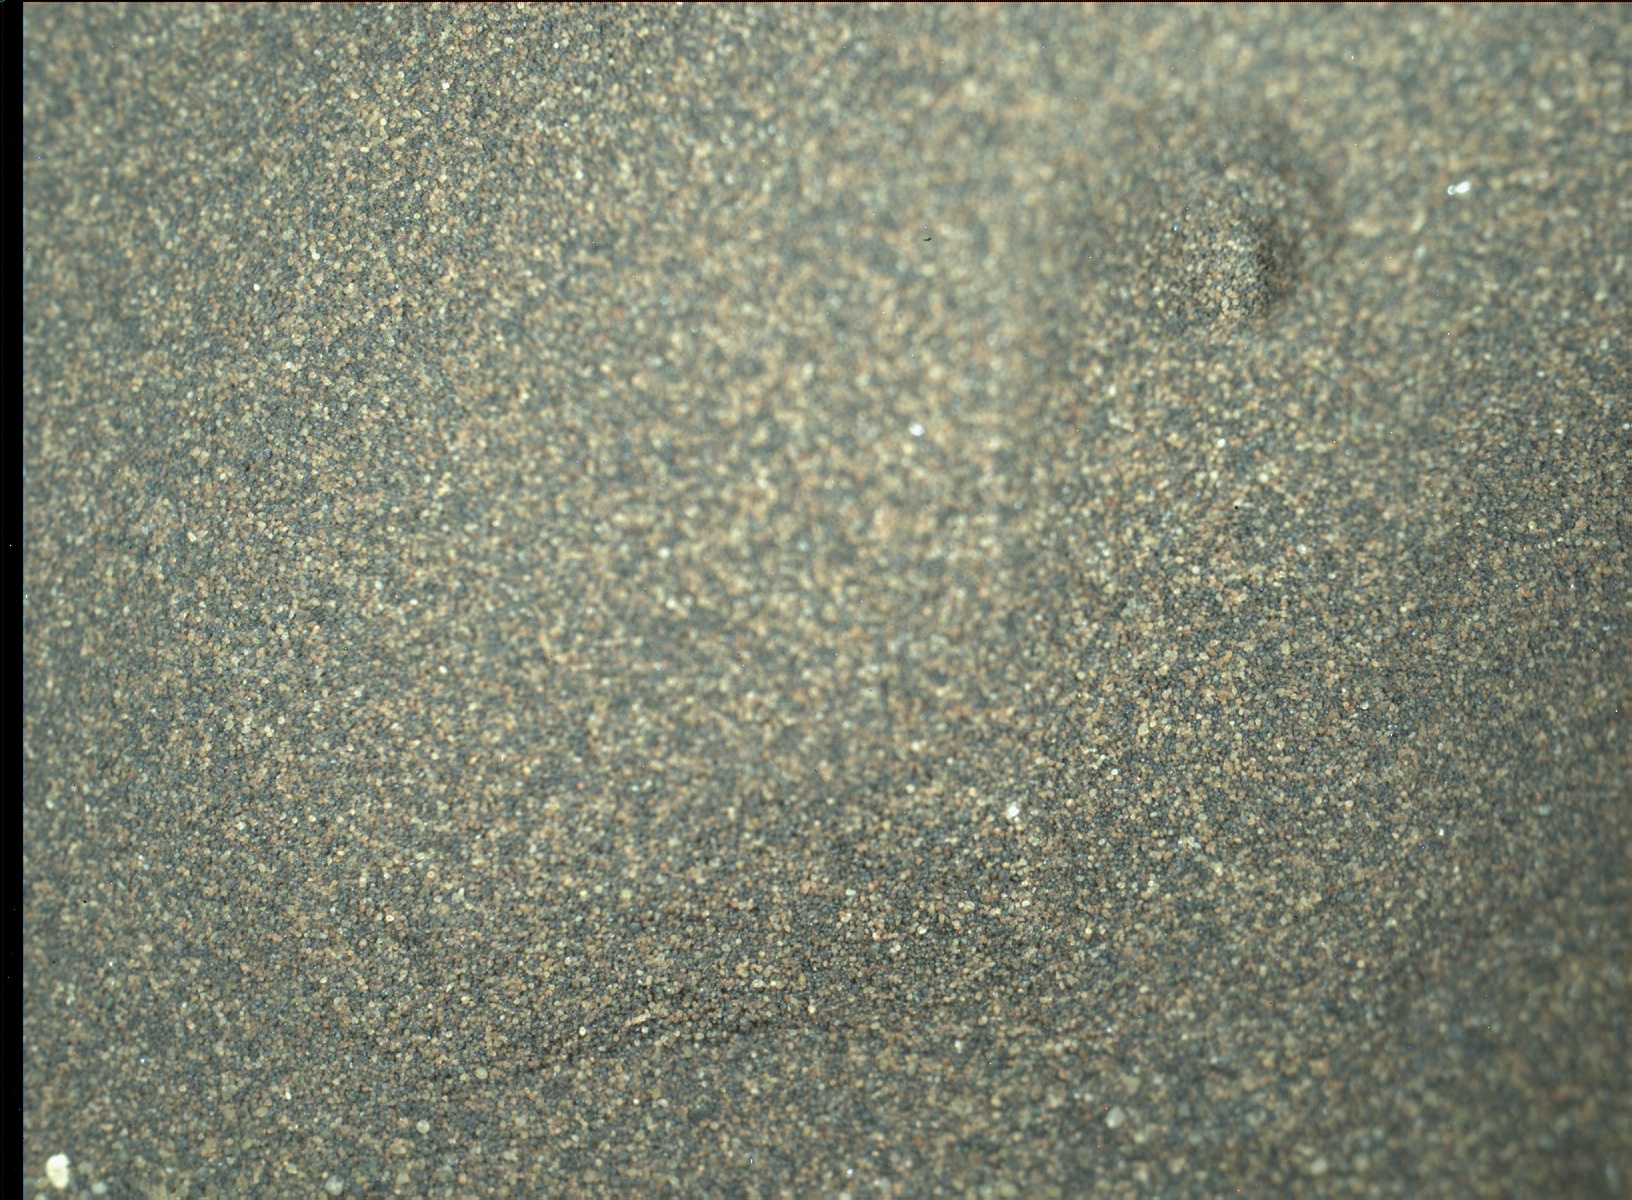 Nasa's Mars rover Curiosity acquired this image using its Mars Hand Lens Imager (MAHLI) on Sol 1230